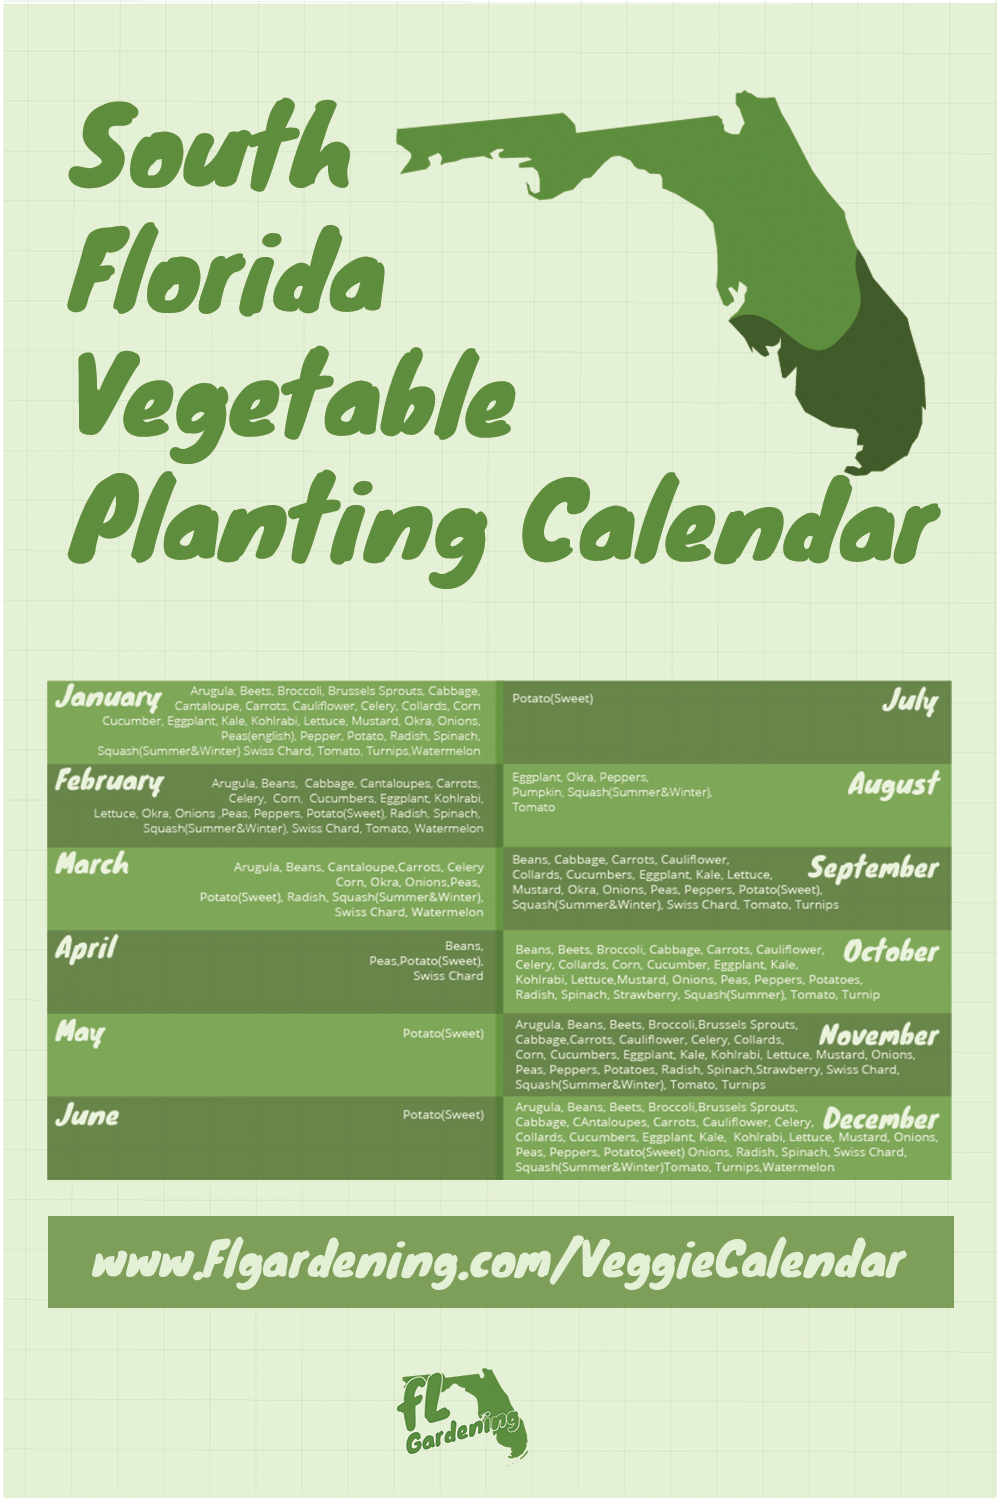 Vegetable Planting Calendar For South Florida -   14 plants Flowers in florida ideas